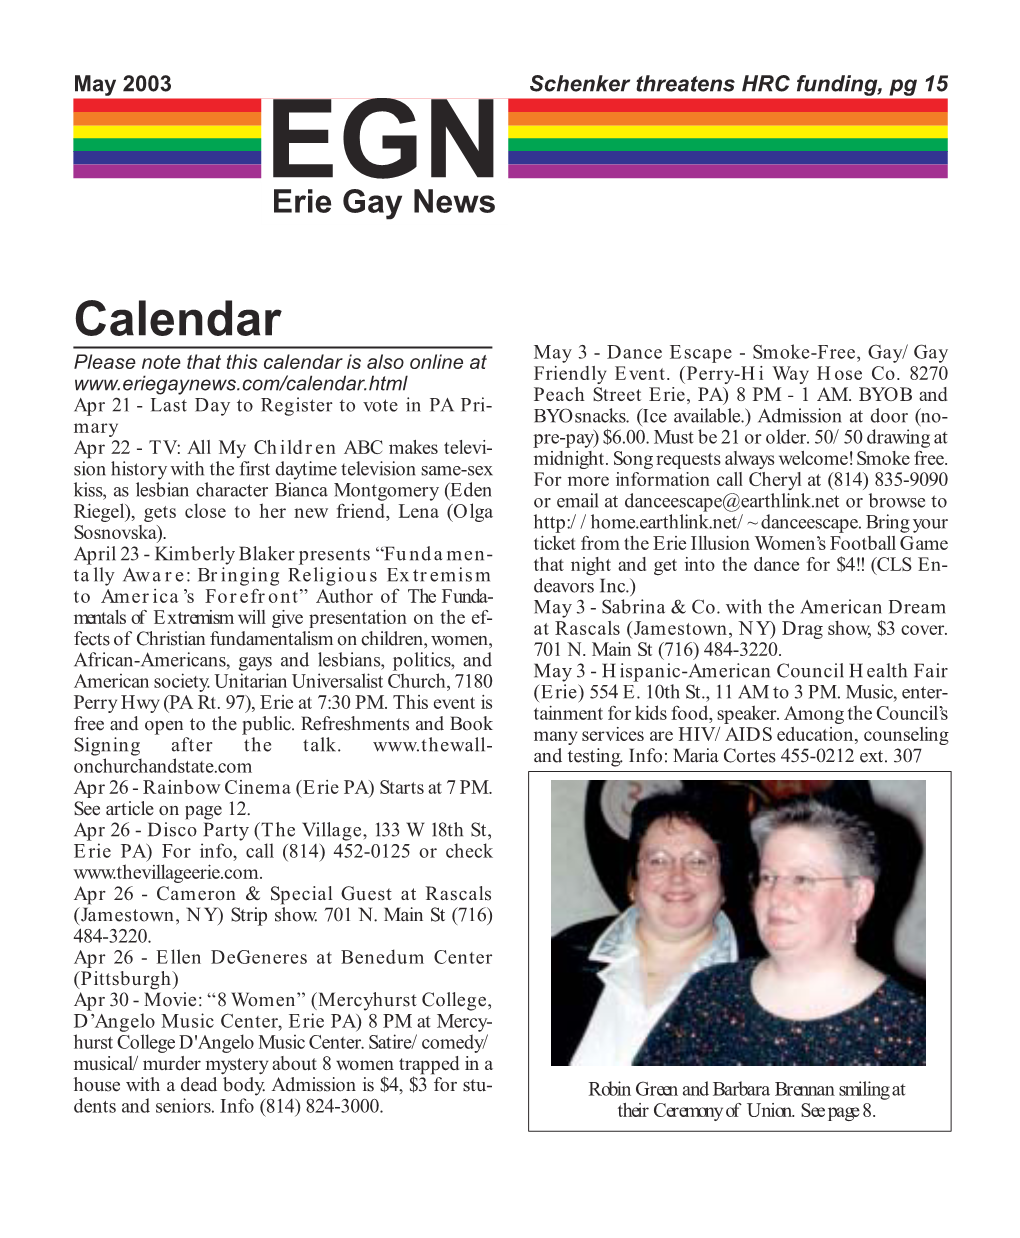 Calendar Please Note That This Calendar Is Also Online at May 3 - Dance Escape - Smoke-Free, Gay/Gay Friendly Event